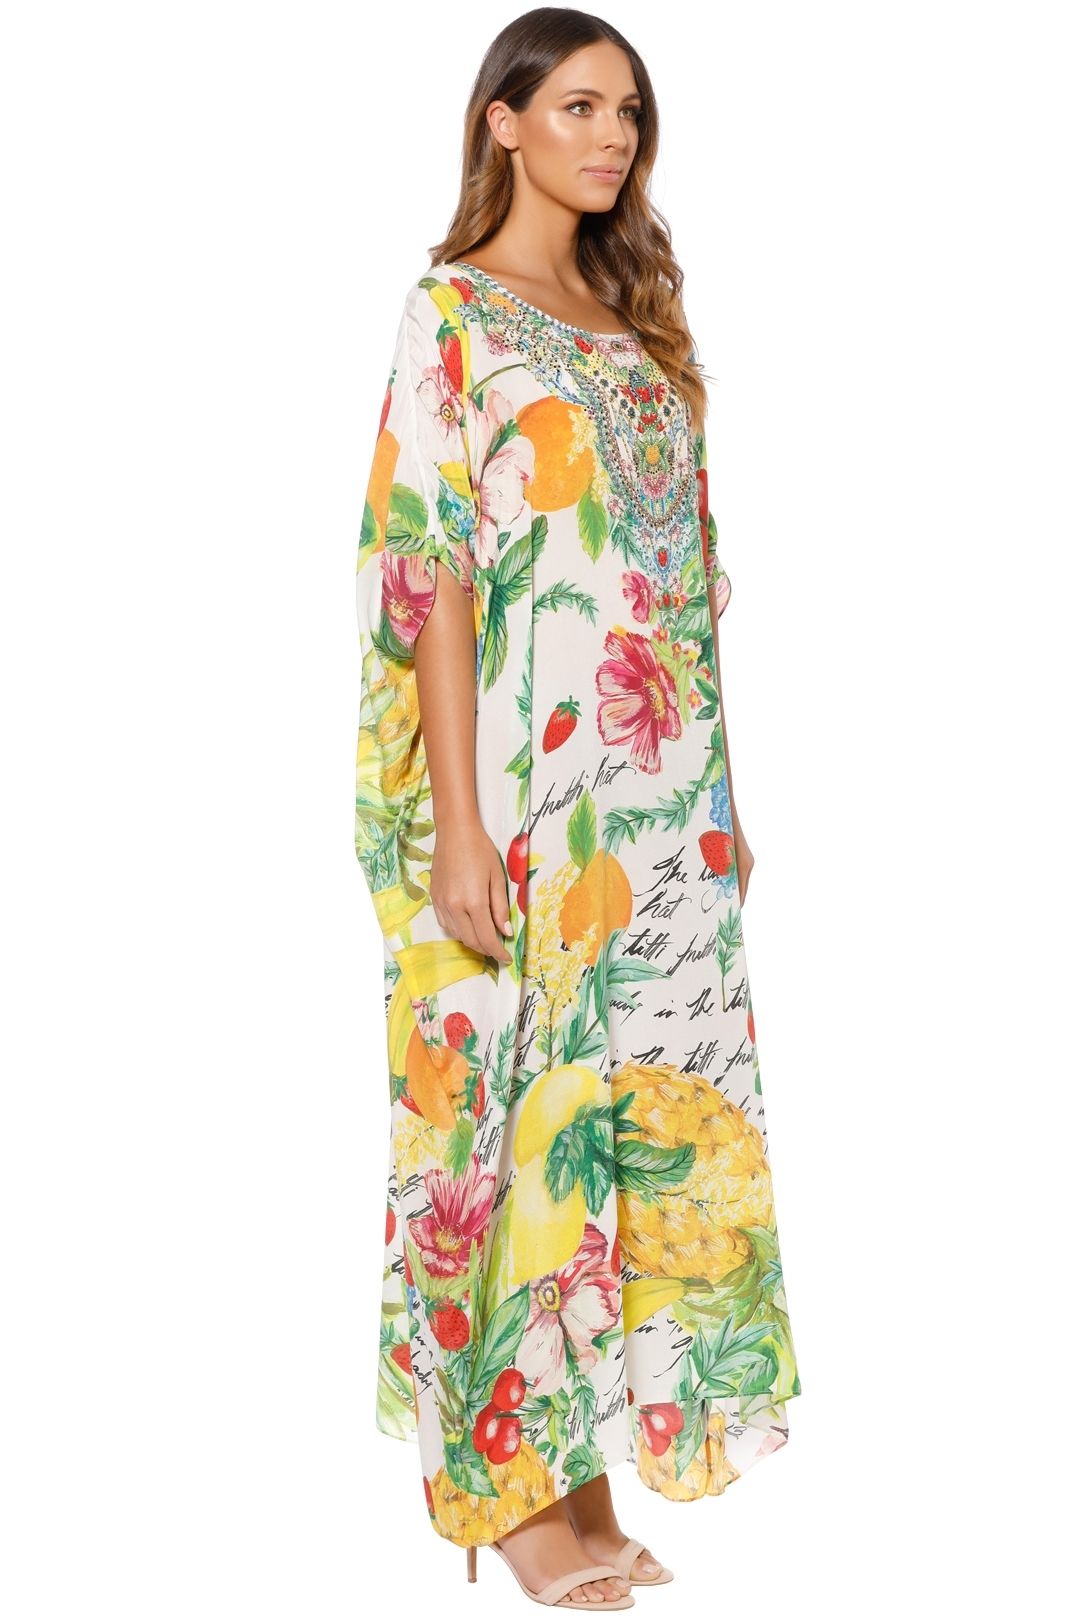 Camilla - There's No Place Like Rio Round Neck Kaftan - Prints - Side